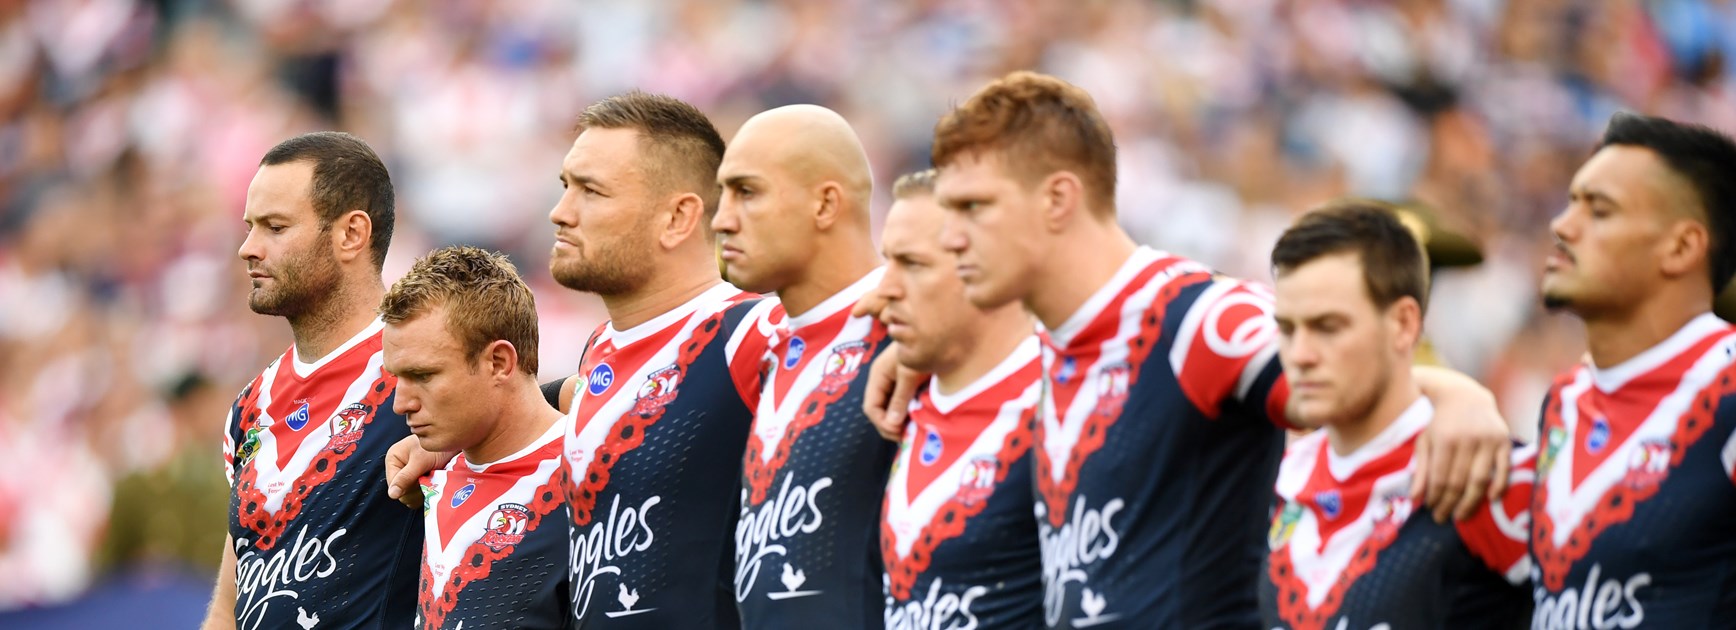 Roosters players on Anzac Day.